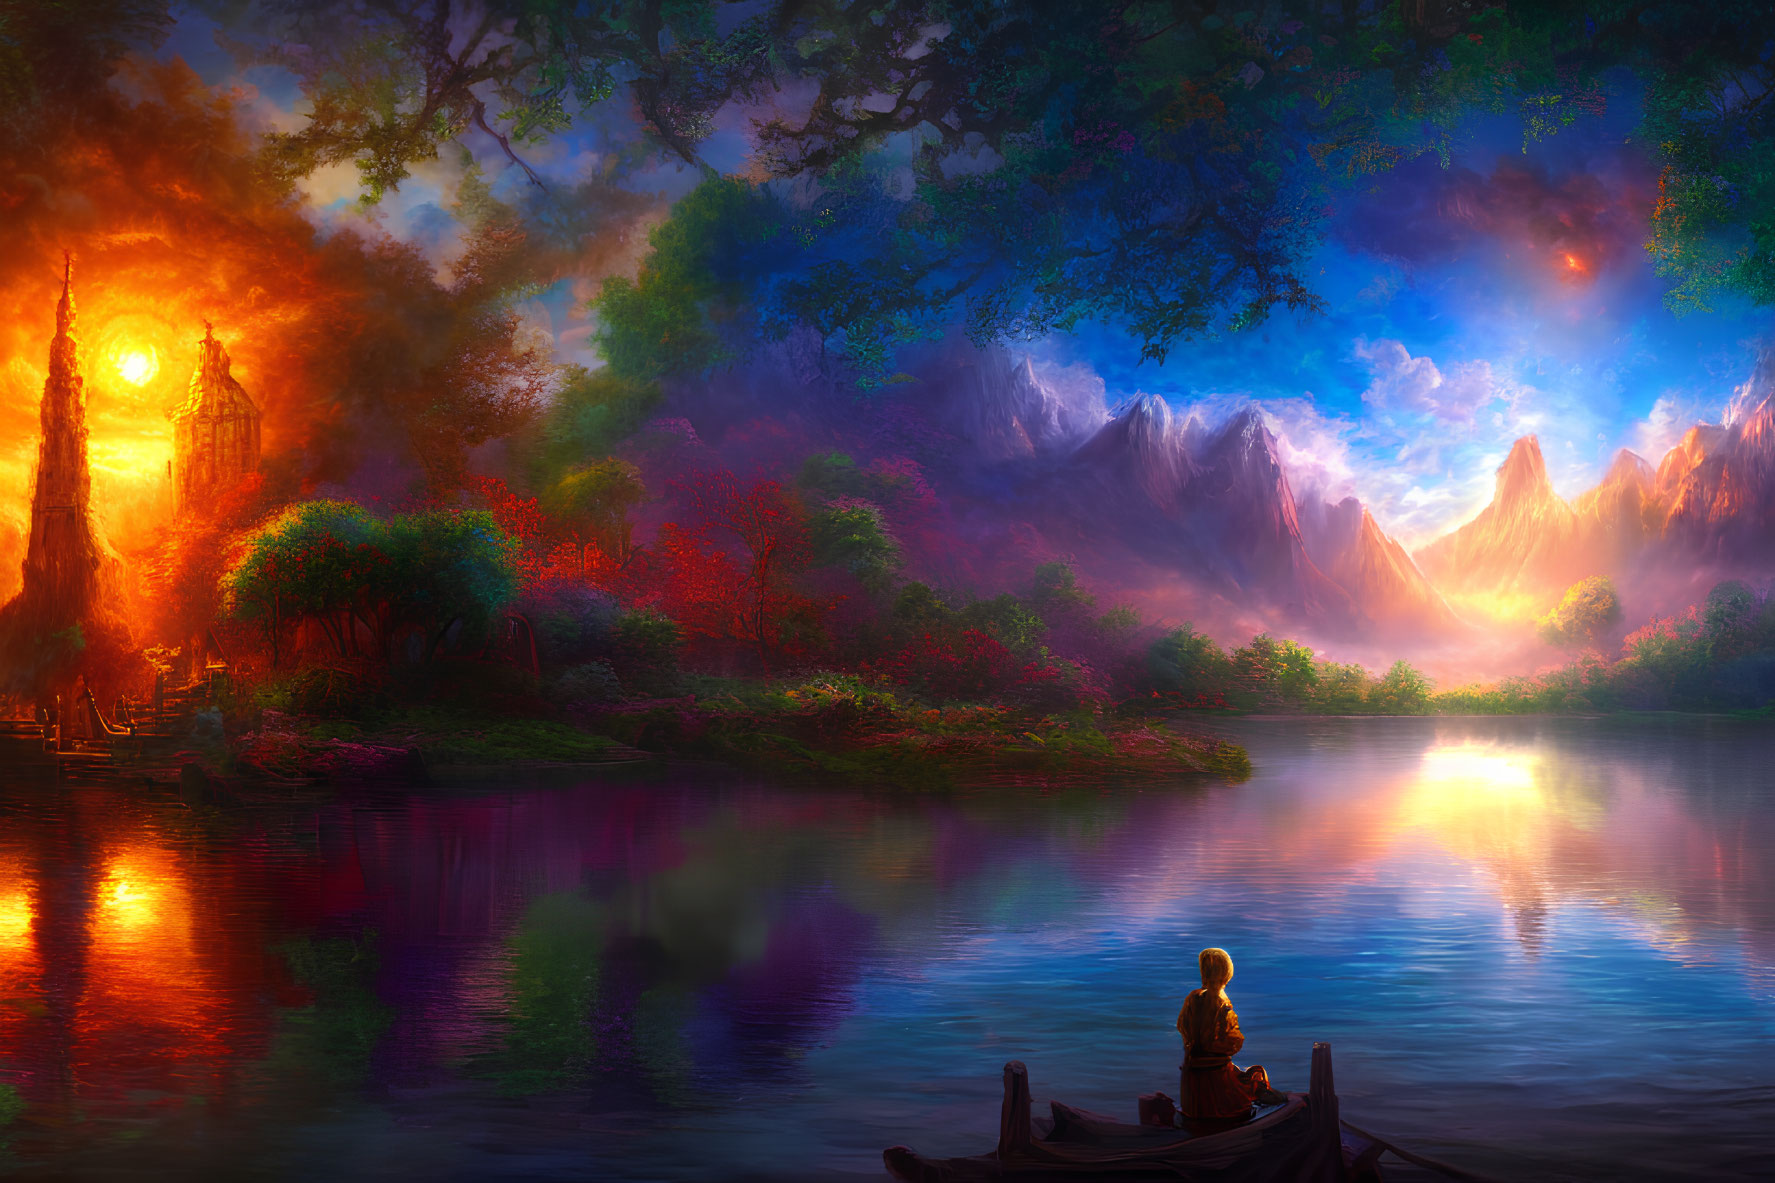 Person sitting on dock by serene lake with colorful trees, mountains, and sunlit sky